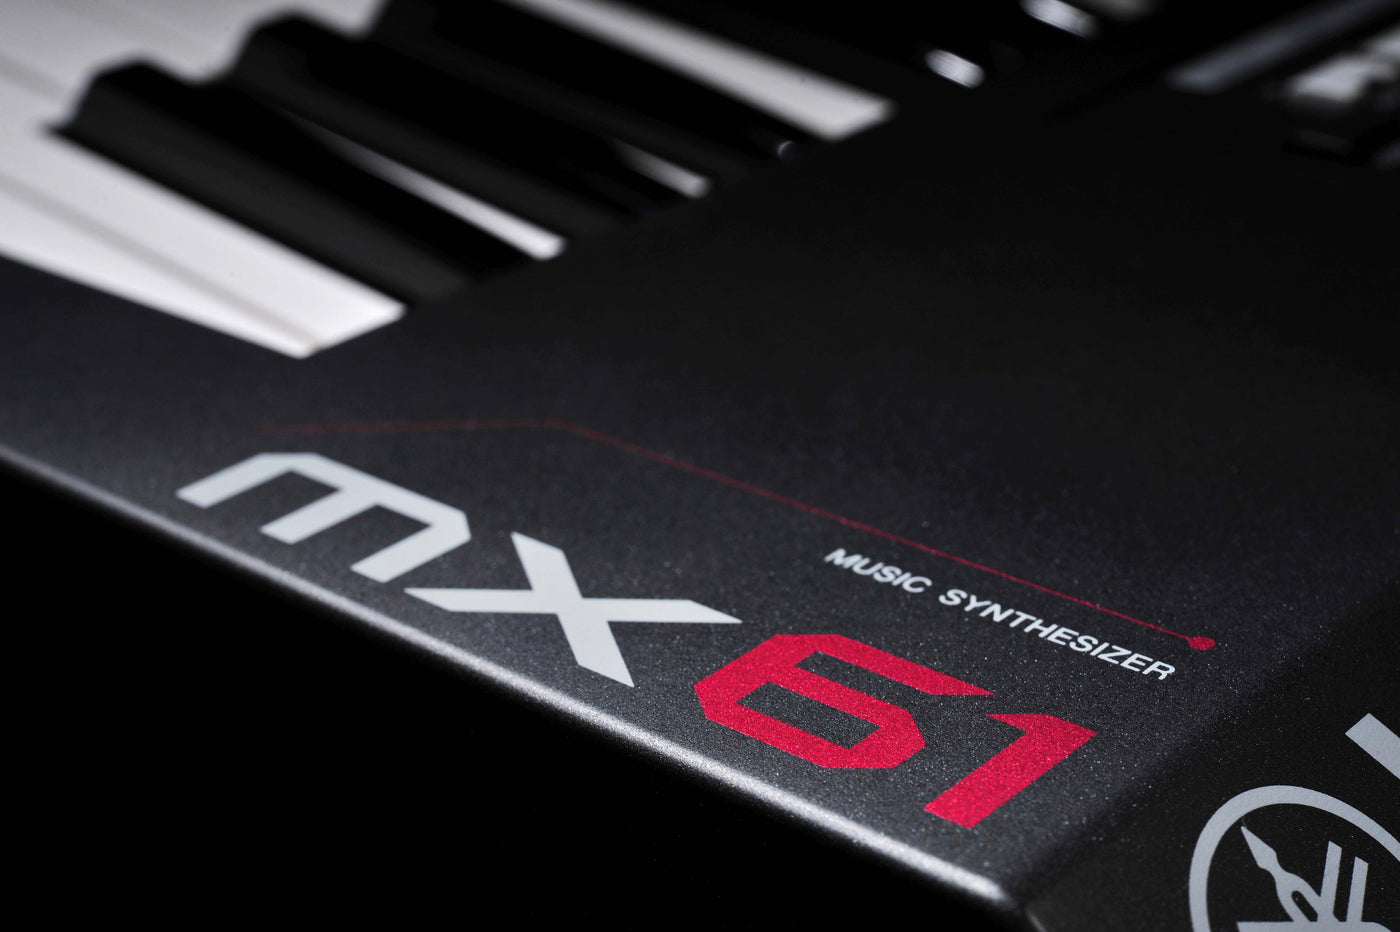 close-up of the corner of a music synthesizer keyboard showing black and white keys with the model number 'mx61' and the text 'music synthesizer' in red and white lettering.